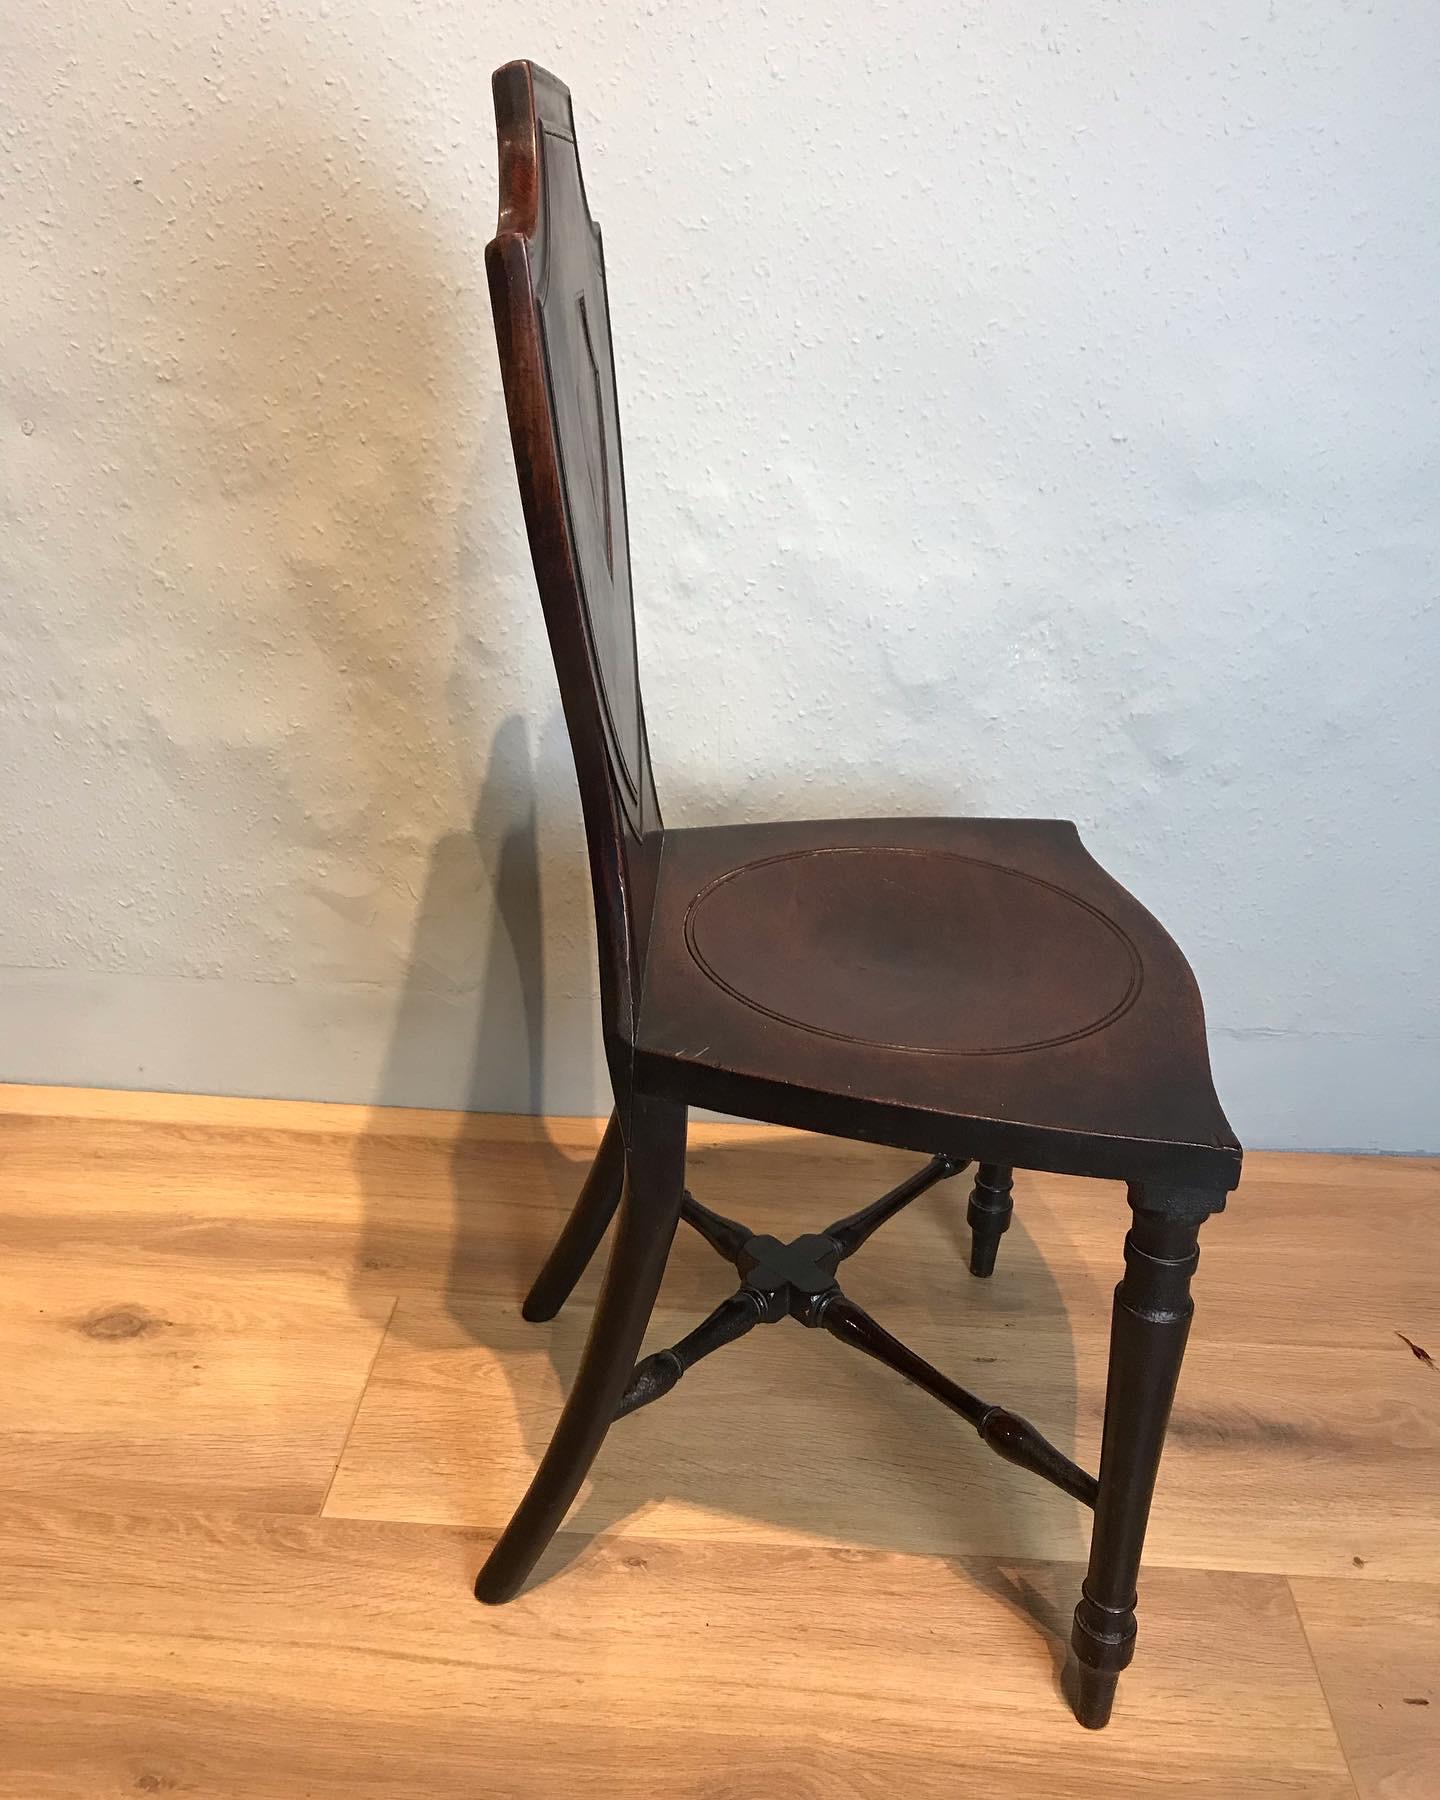 Sheraton period mahogany shield back hall chair circa 1780 with circular dished seat resting on elegant turned legs with lower stretcher, wonderful untouched condition, no breaks with a lovely patina.